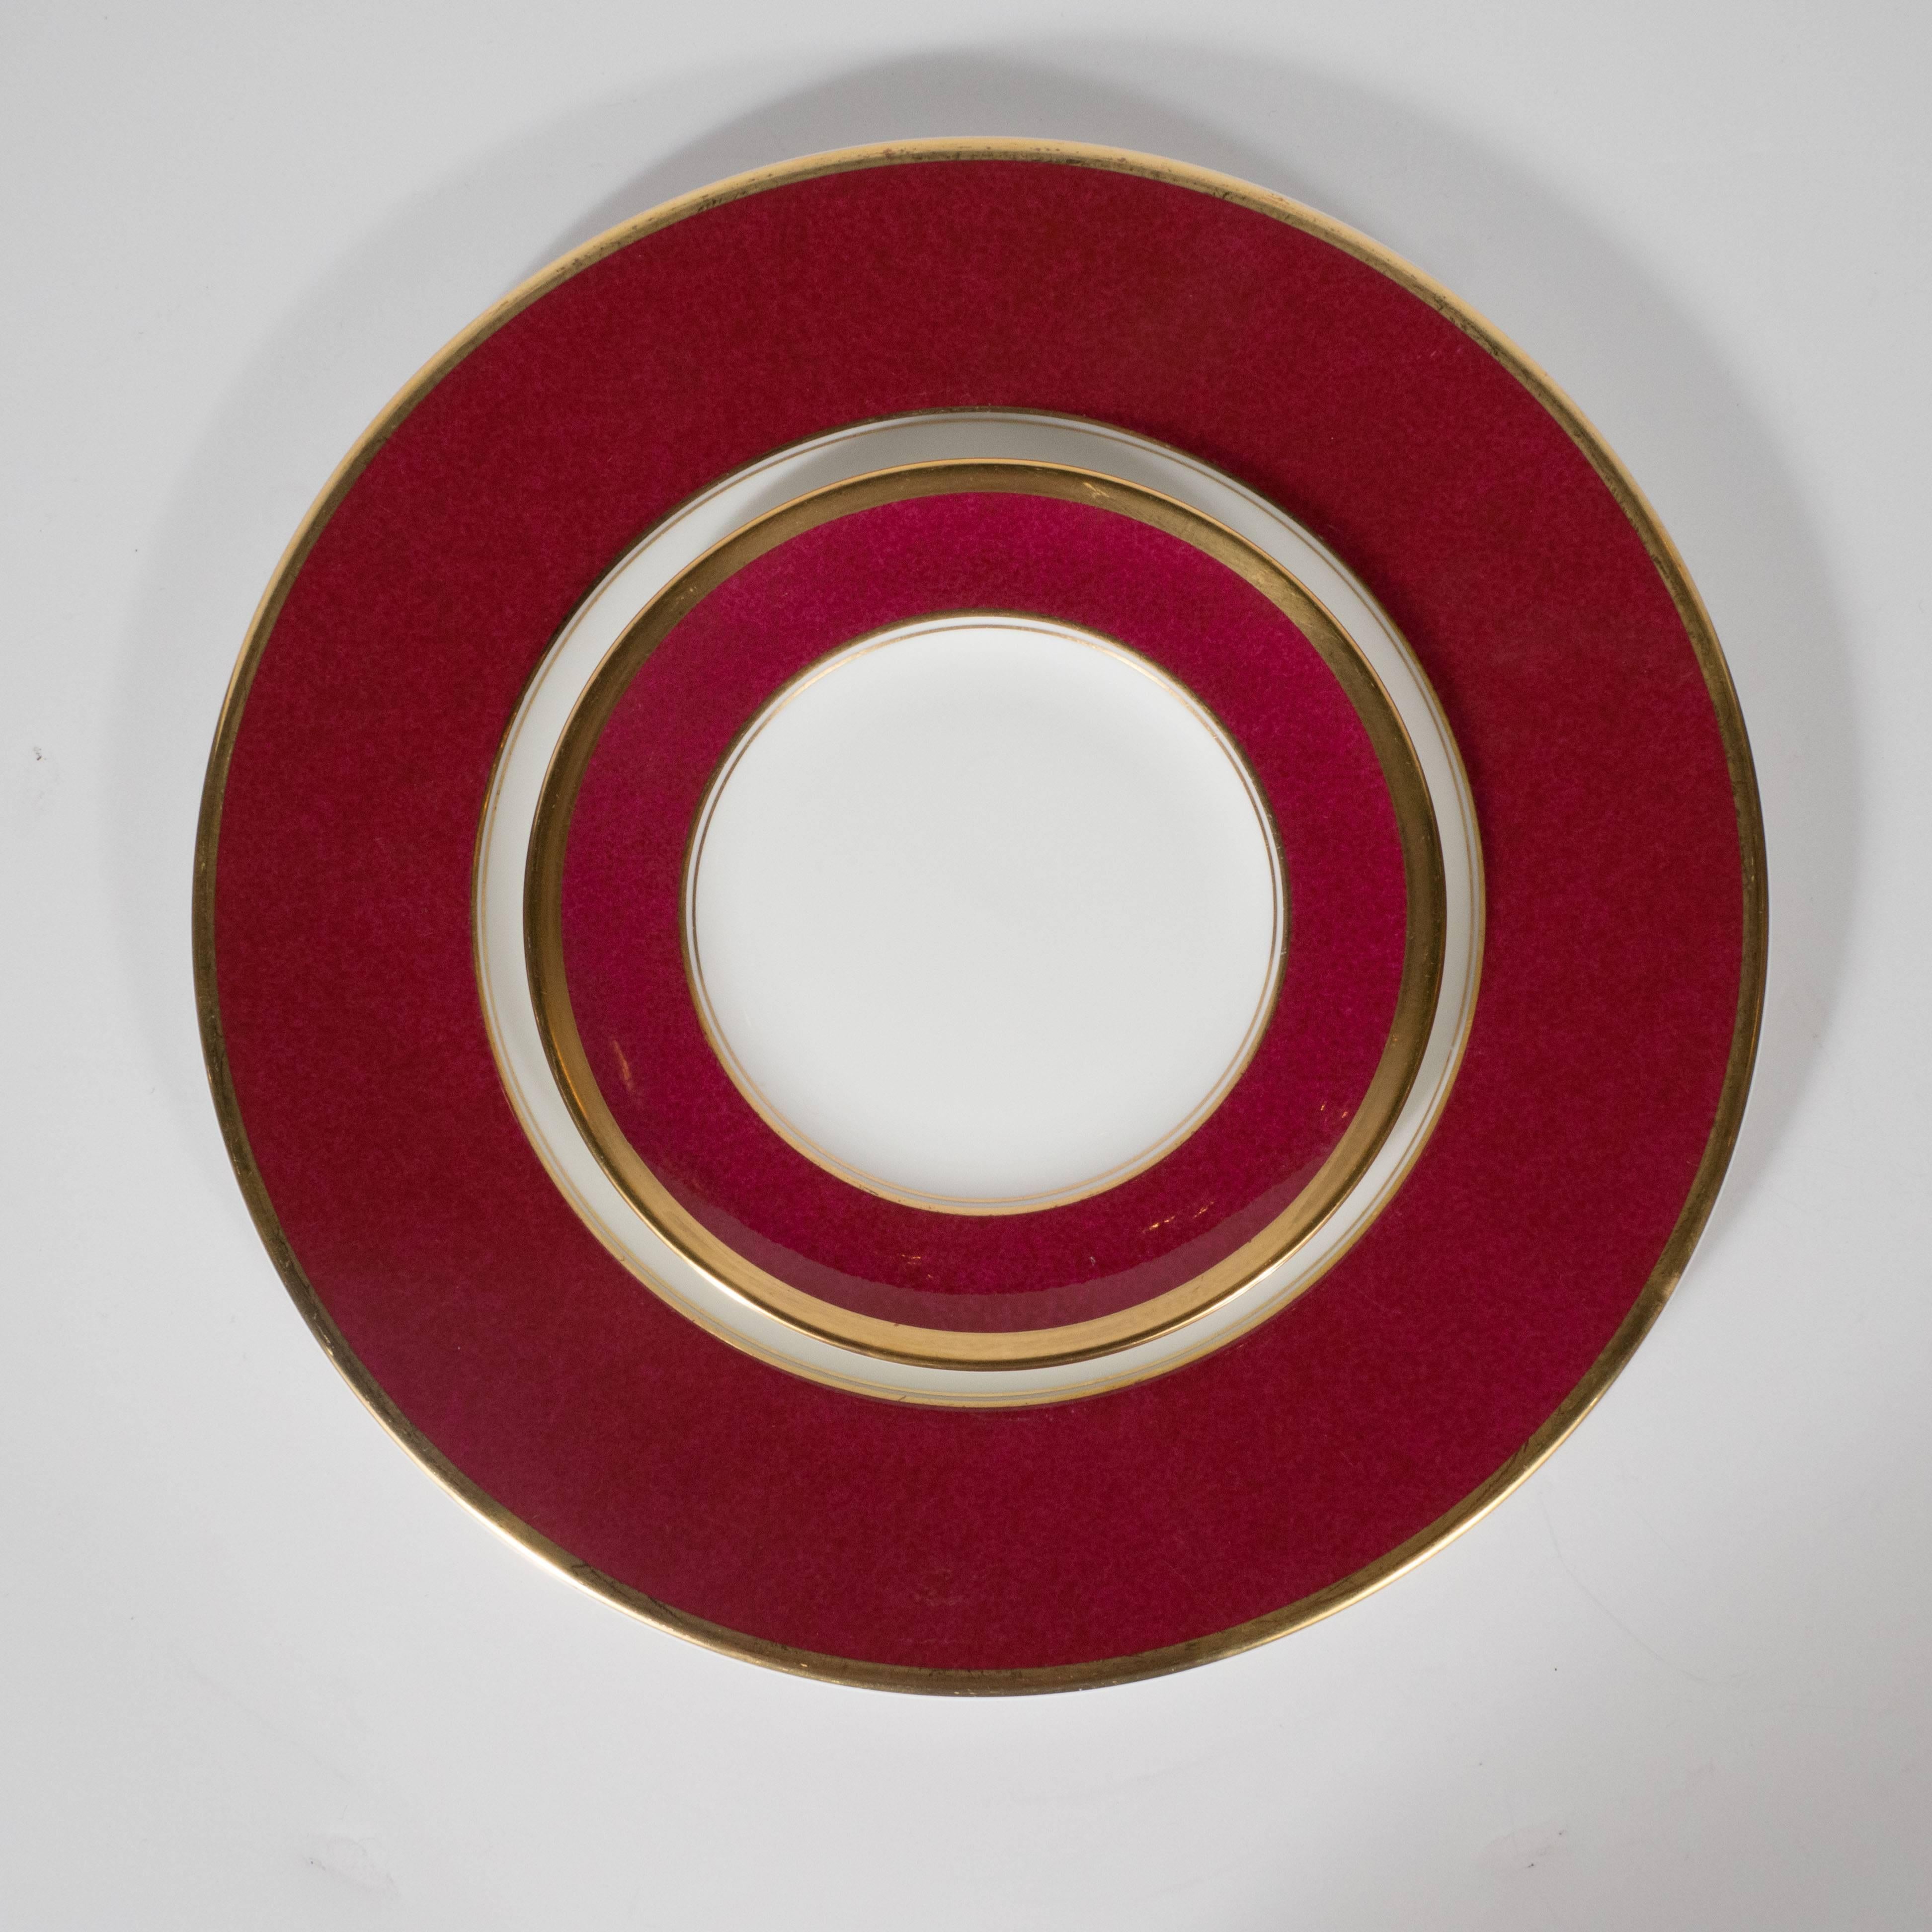 This gorgeous set of Mid-Century Modern bone china dining plates were realized by the esteemed British porcelain producer Coalport, circa 1950. The set includes 24 large dinner plates, and 12 smaller hors d'oeuvres plates. Each plate features three